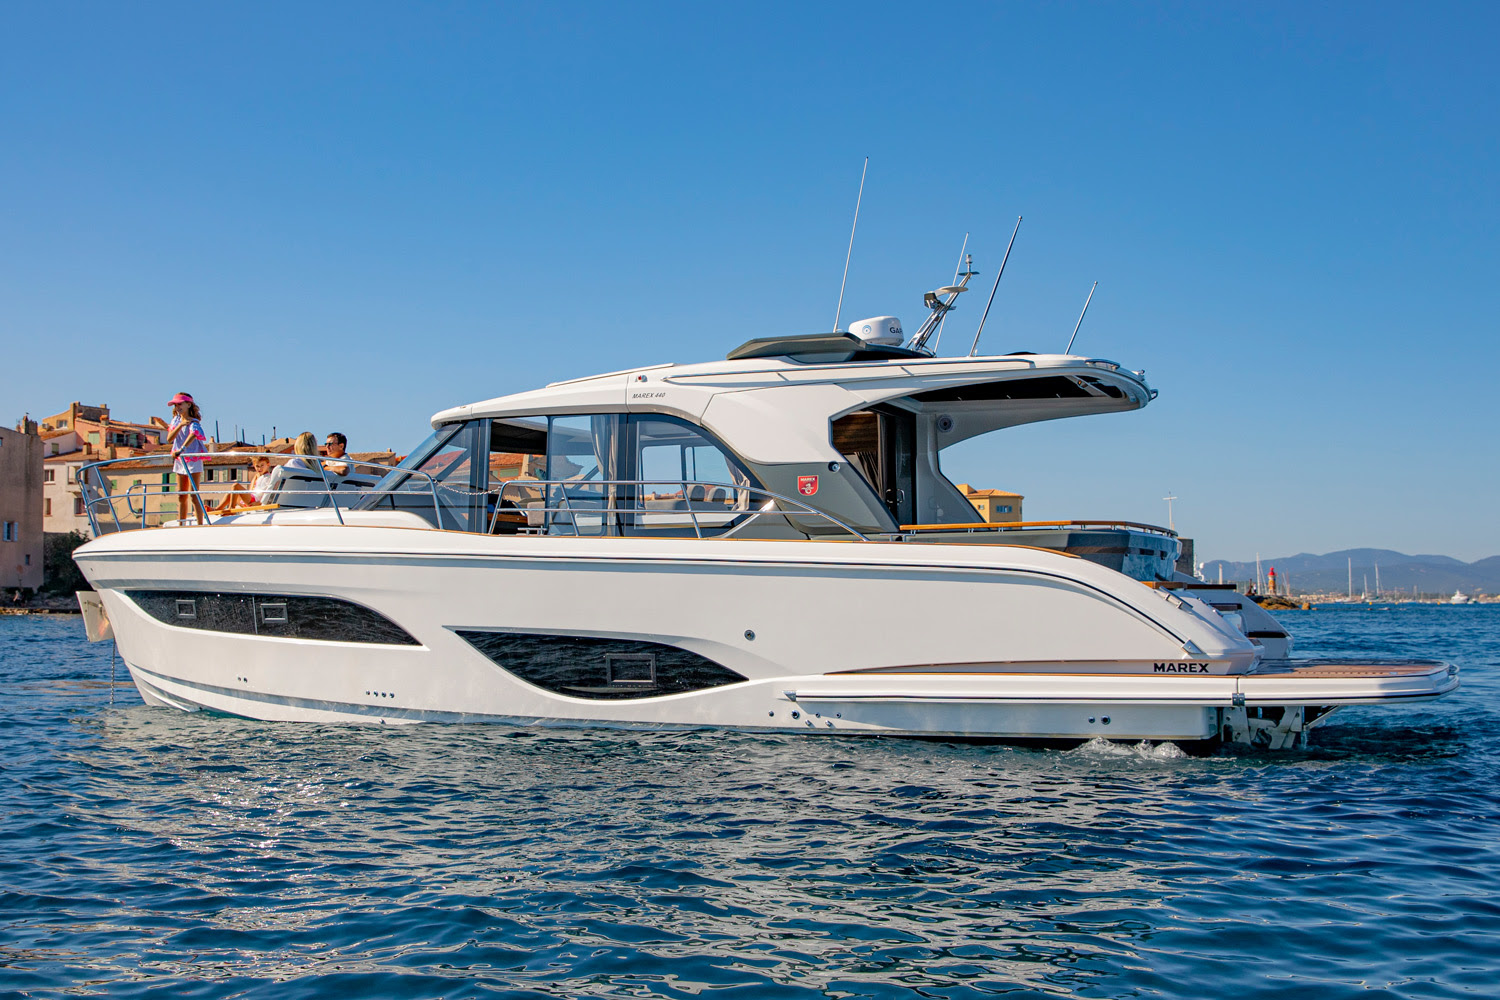 The Marex 440 Gourmet Cruiser from the Most Awarded Boat Builder